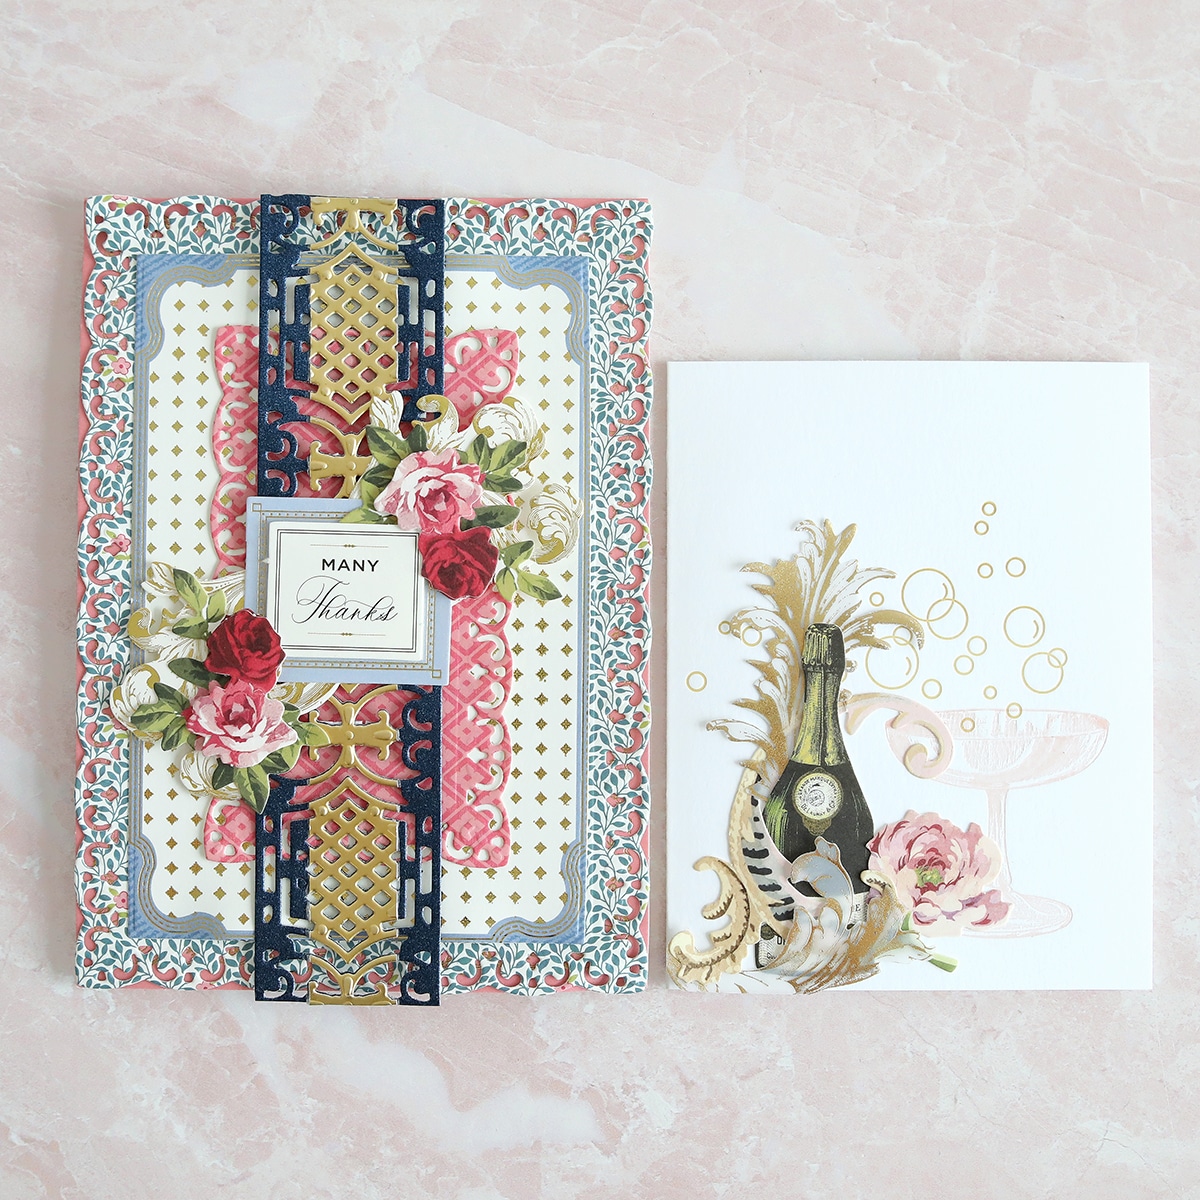 a card with a vase of flowers on it next to a greeting card.